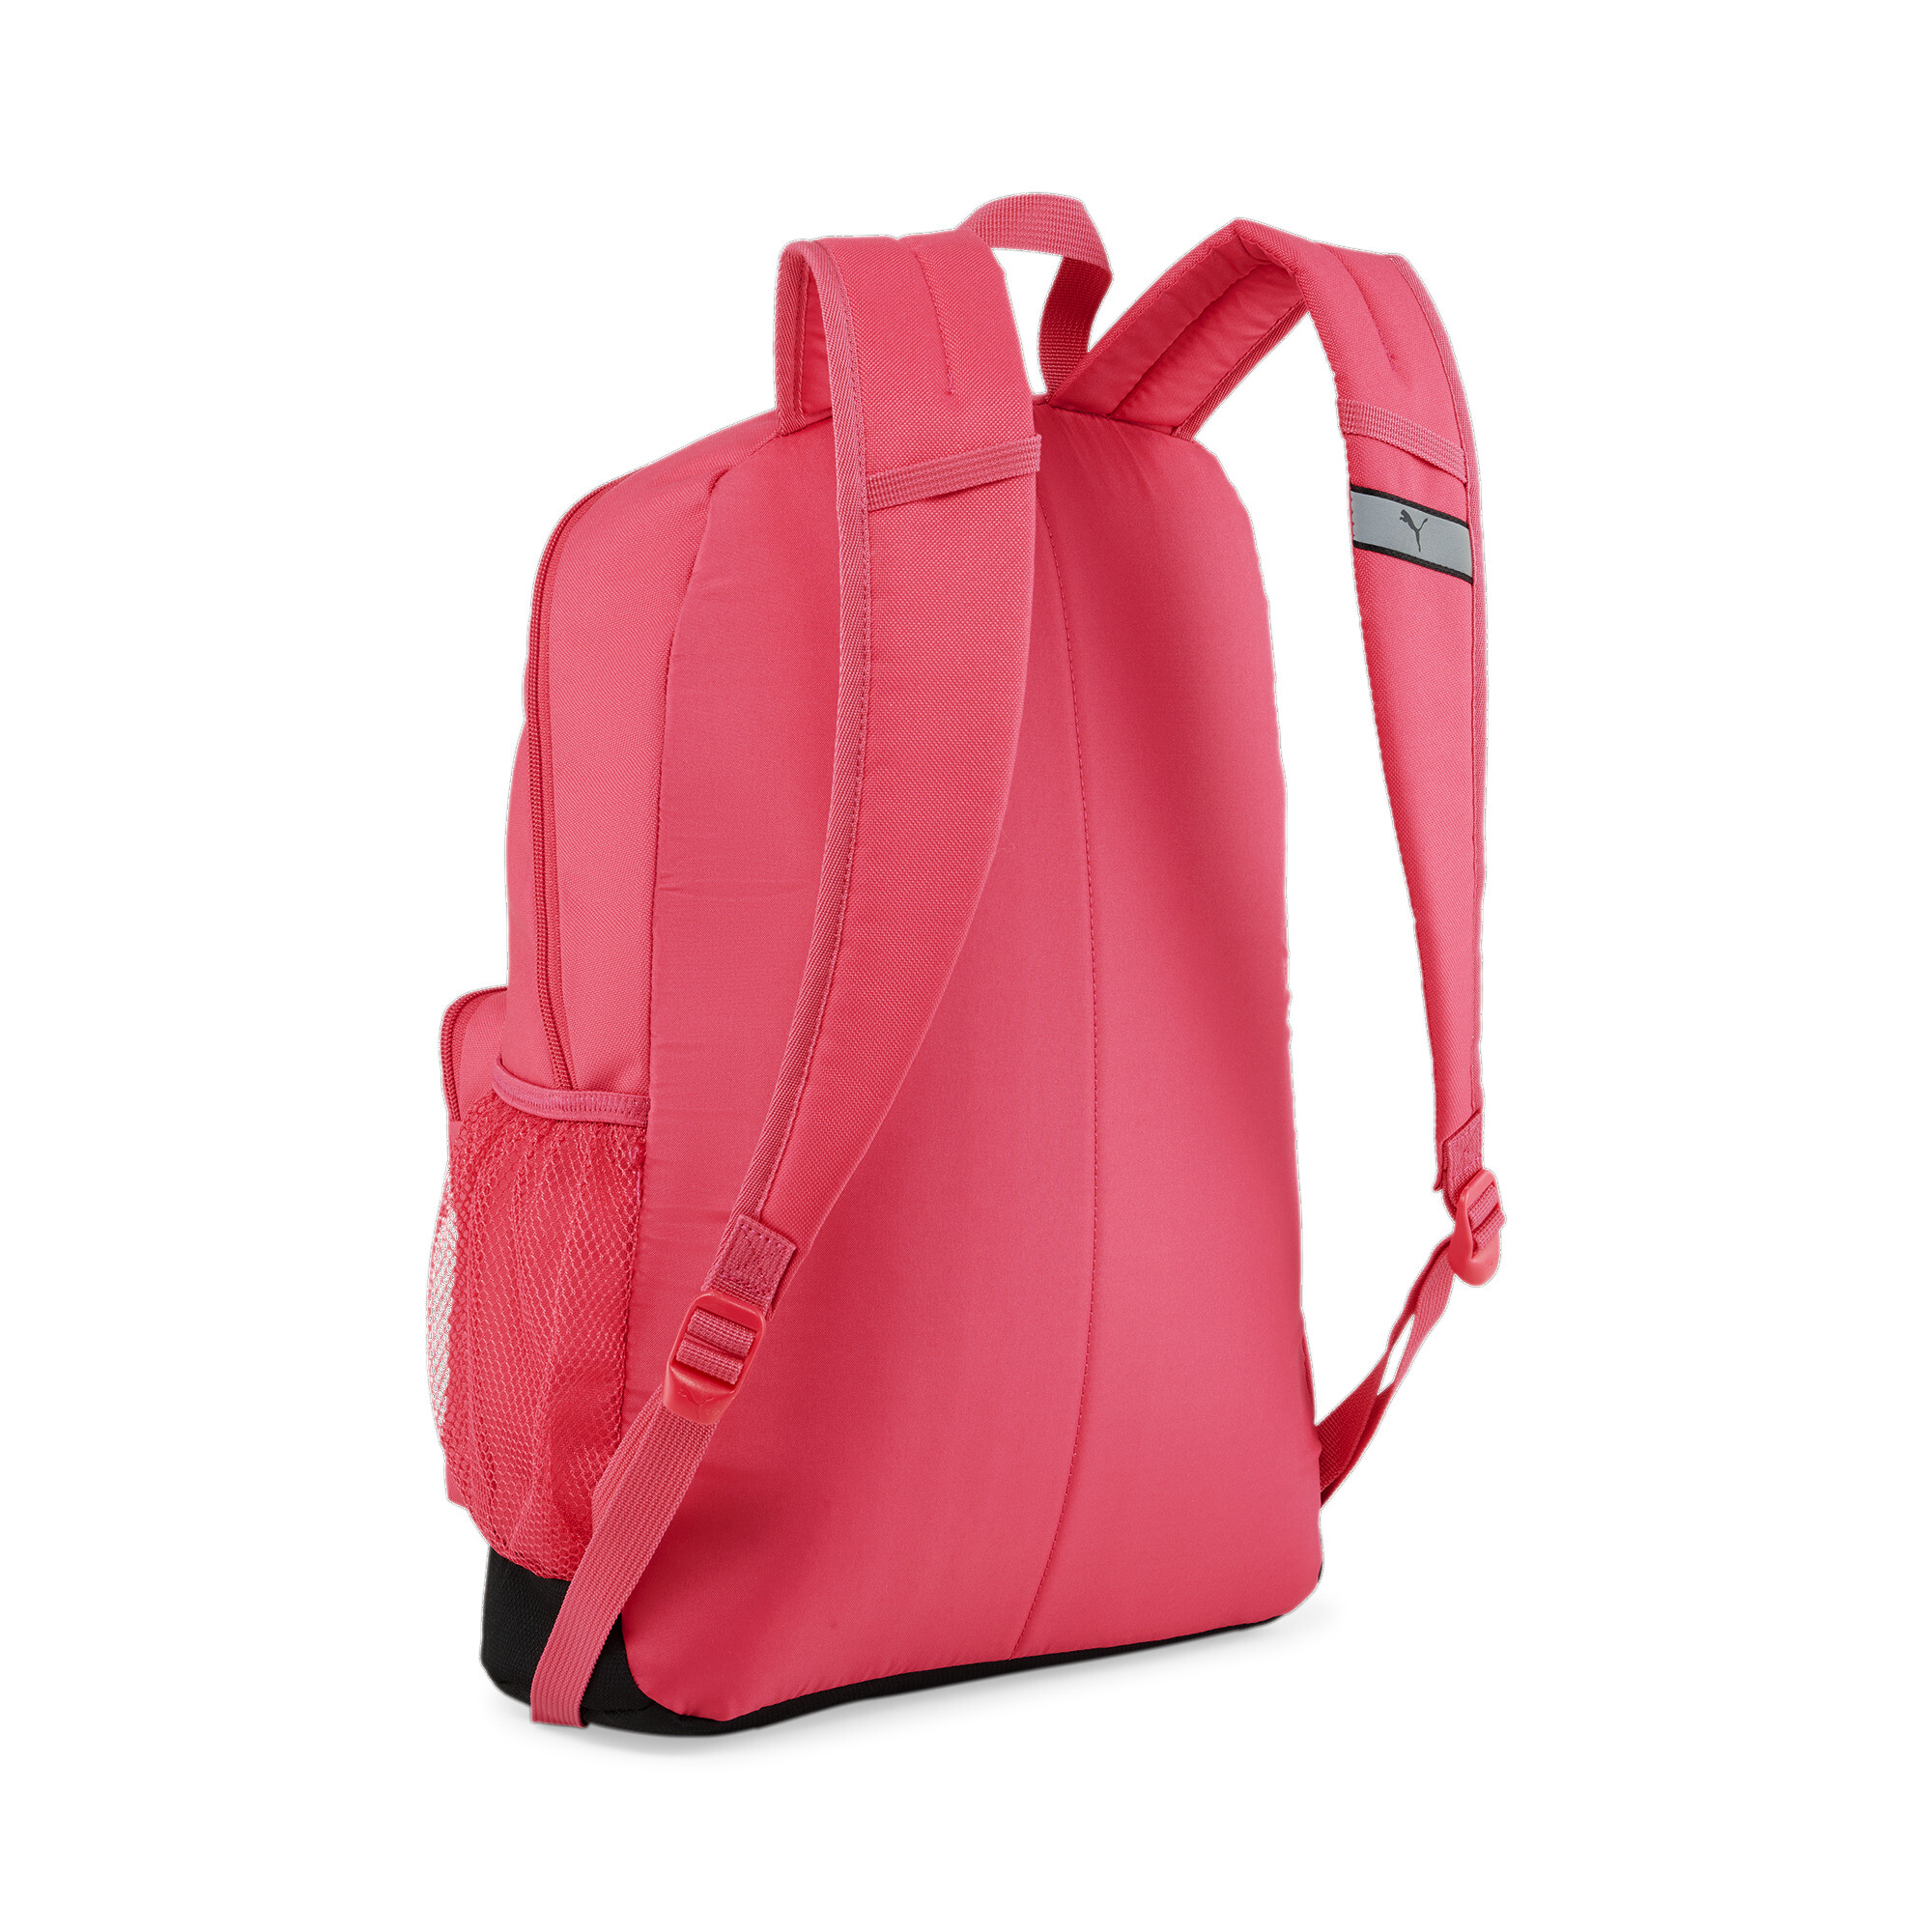 Puma Patch Backpack, Pink, Accessories